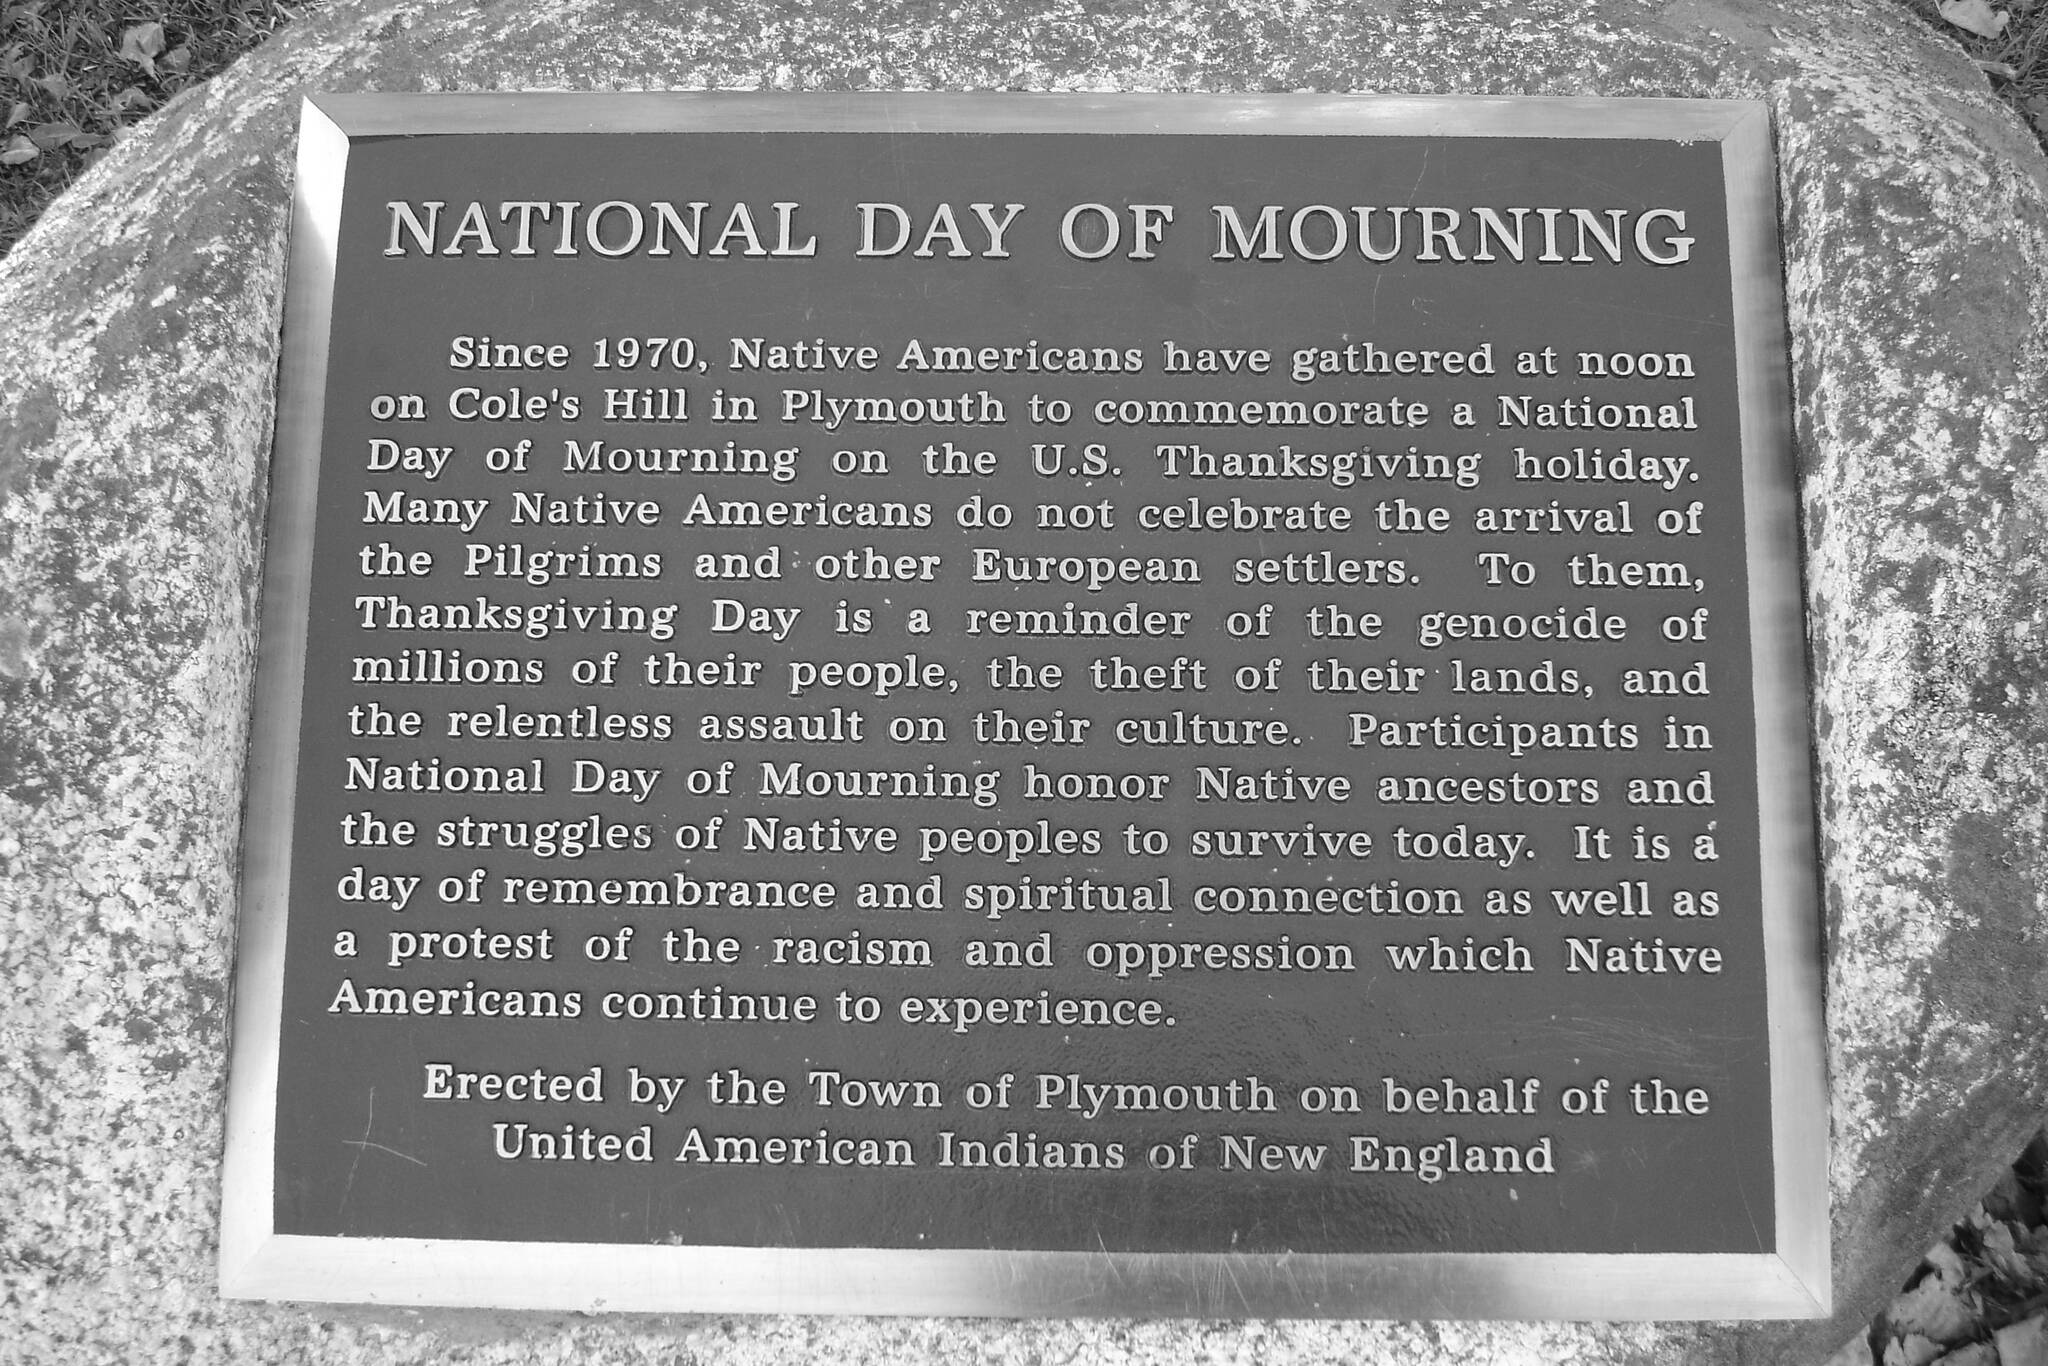 This undated photos shows National Day of Mourning plaque on Cole's Hill in Plymouth, Mass, where since 1970 Indigenous groups have gathered to mourn the history of colonization in North America. This year marks the 400th anniversary of the traditional "First Thanksgiving " in 1621, but for many Indigenous people, including Alaska Natives, the holiday is a somber one. (Courtesy photo / Creative commons)